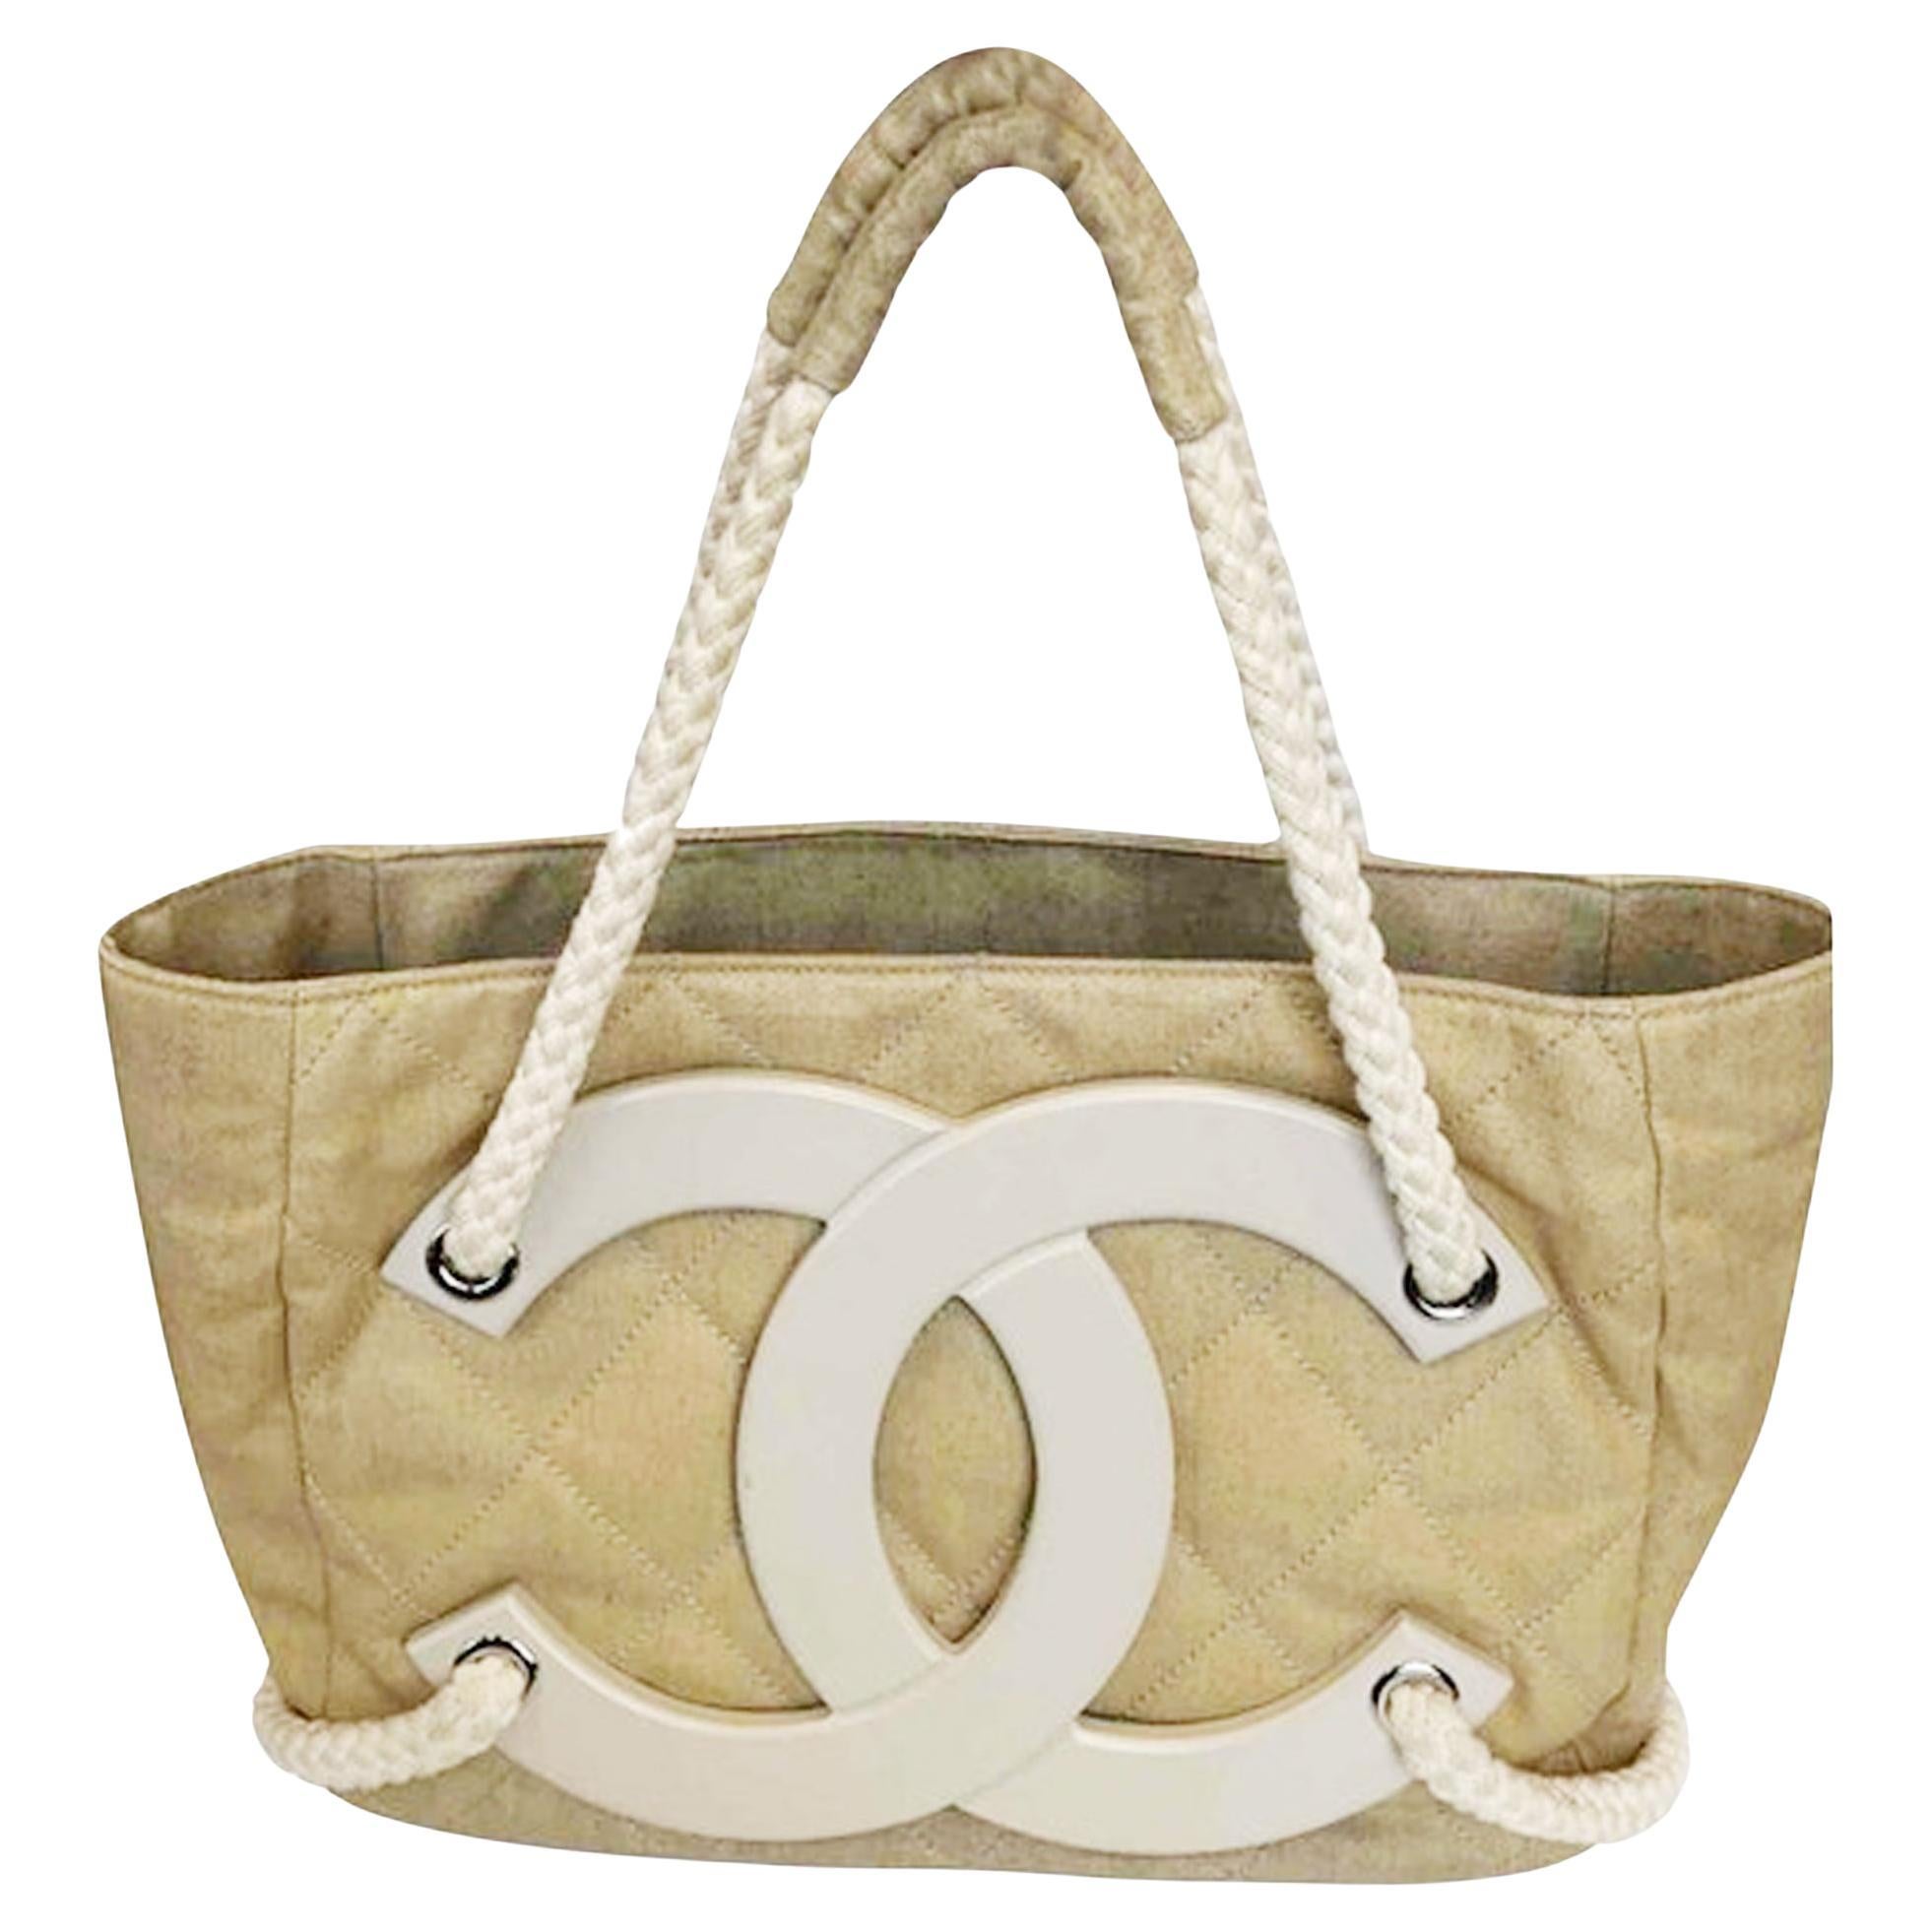 Chanel 2008 Cruise Yacht Coated Canvas Beige CC Limited Edition Beach Tote Bag